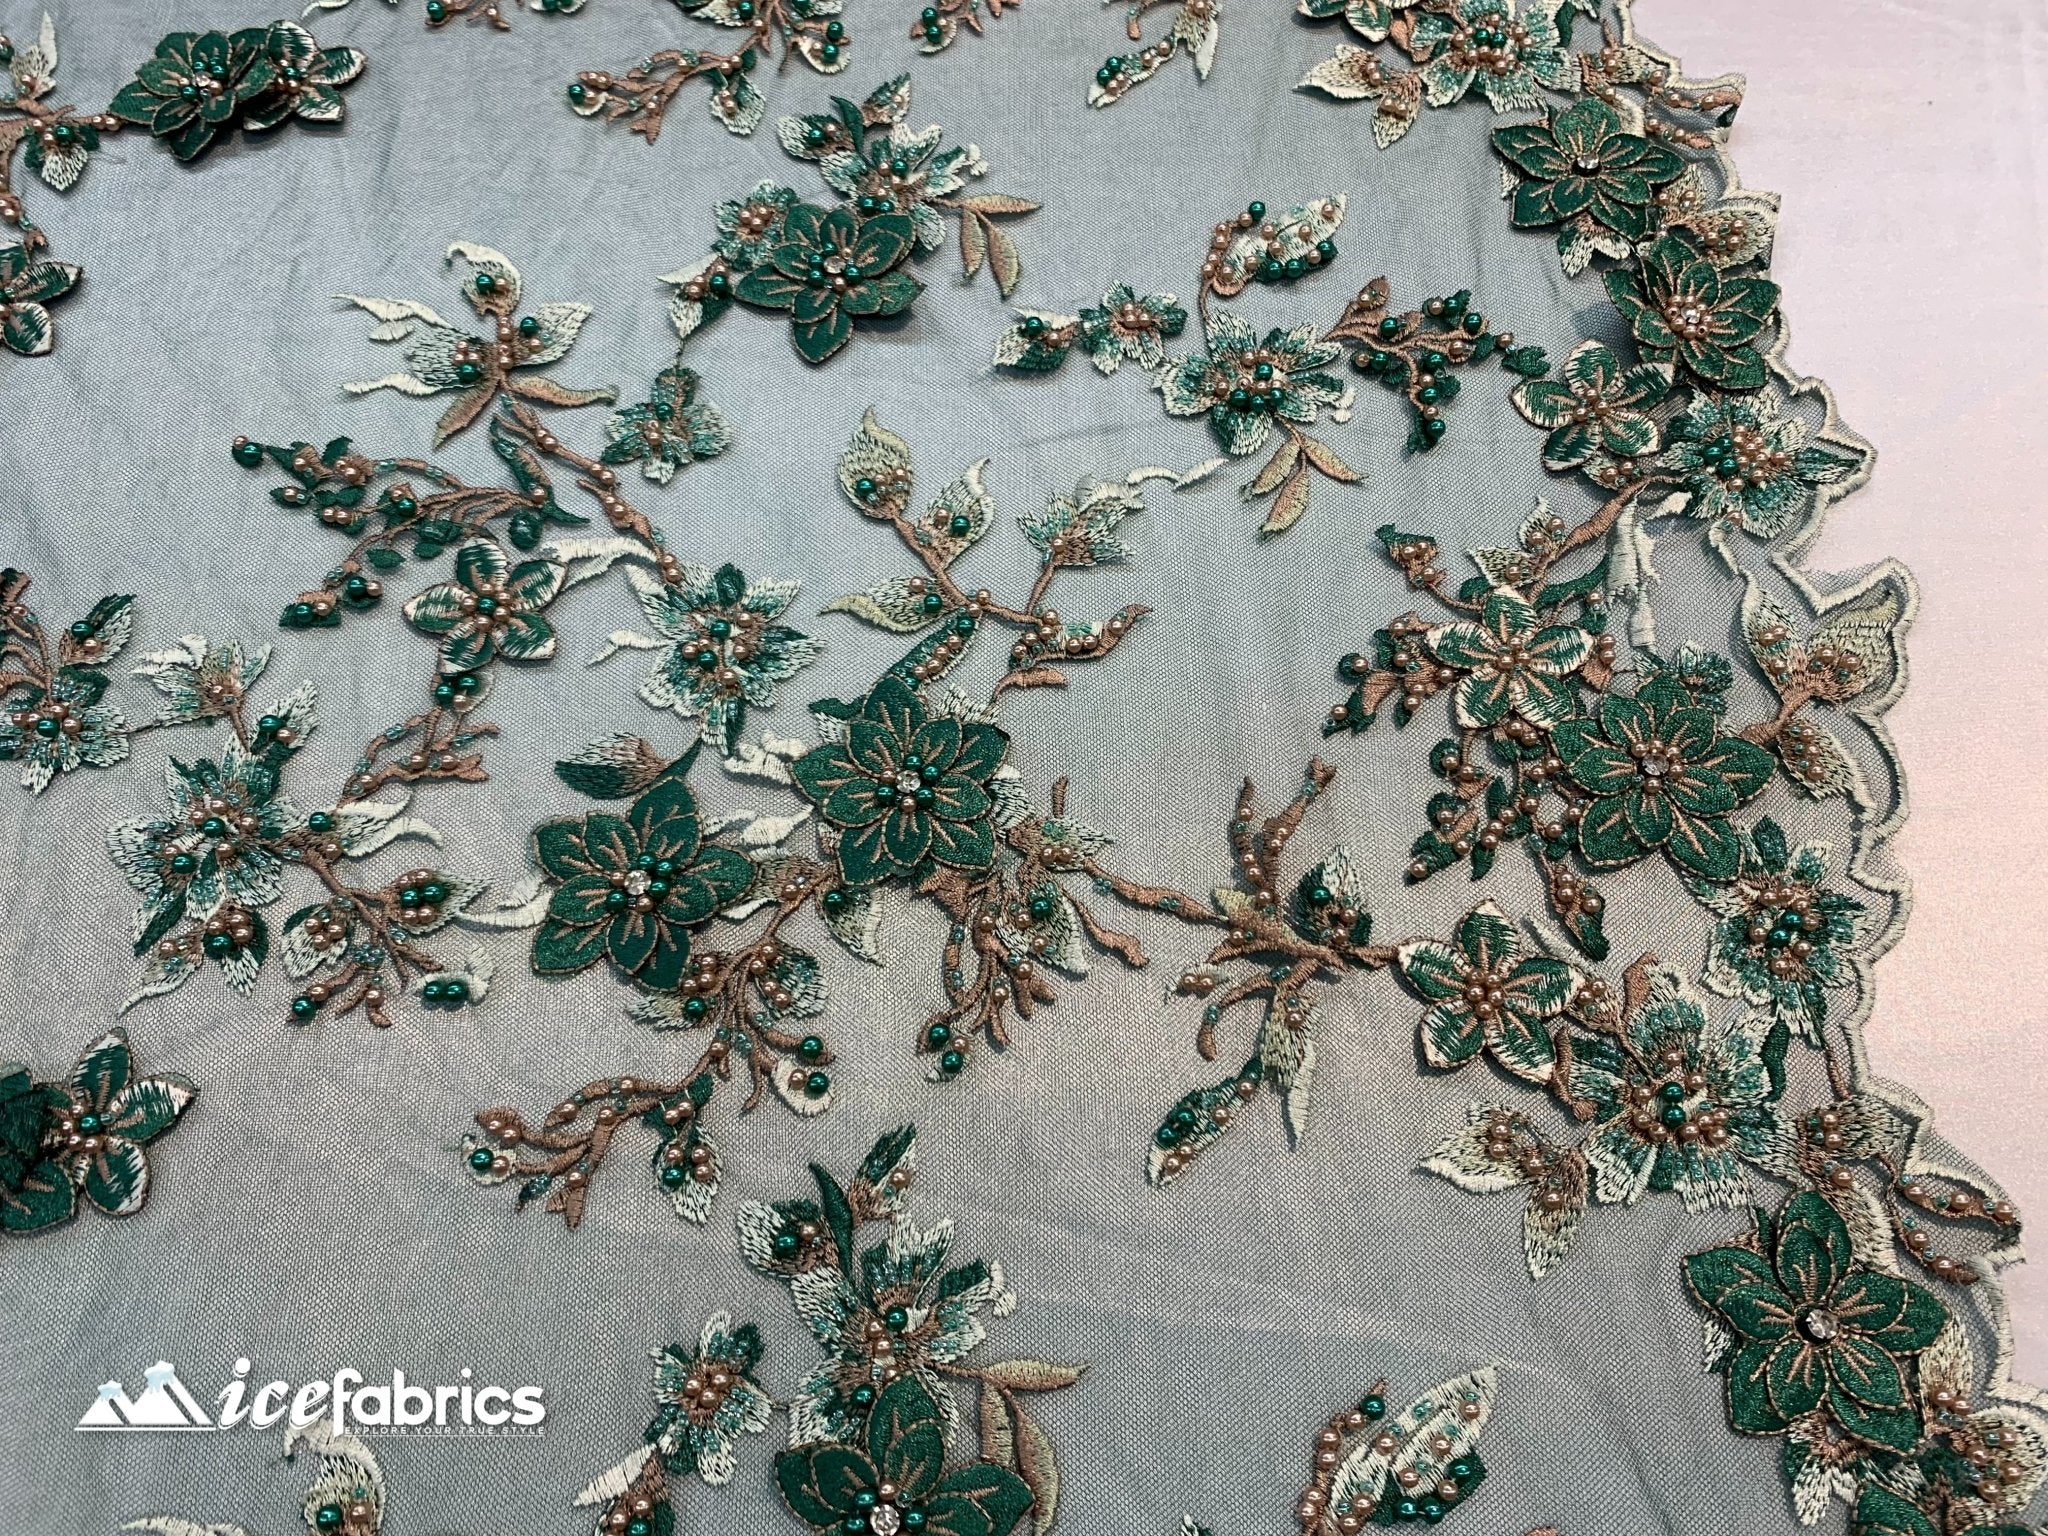 Flowers Embroidered Beaded Fabric/ Mesh Lace Fabric/ Bridal Fabric/ICE FABRICSICE FABRICSHunter GreenFlowers Embroidered Beaded Fabric/ Mesh Lace Fabric/ Bridal Fabric/ ICE FABRICS Hunter Green